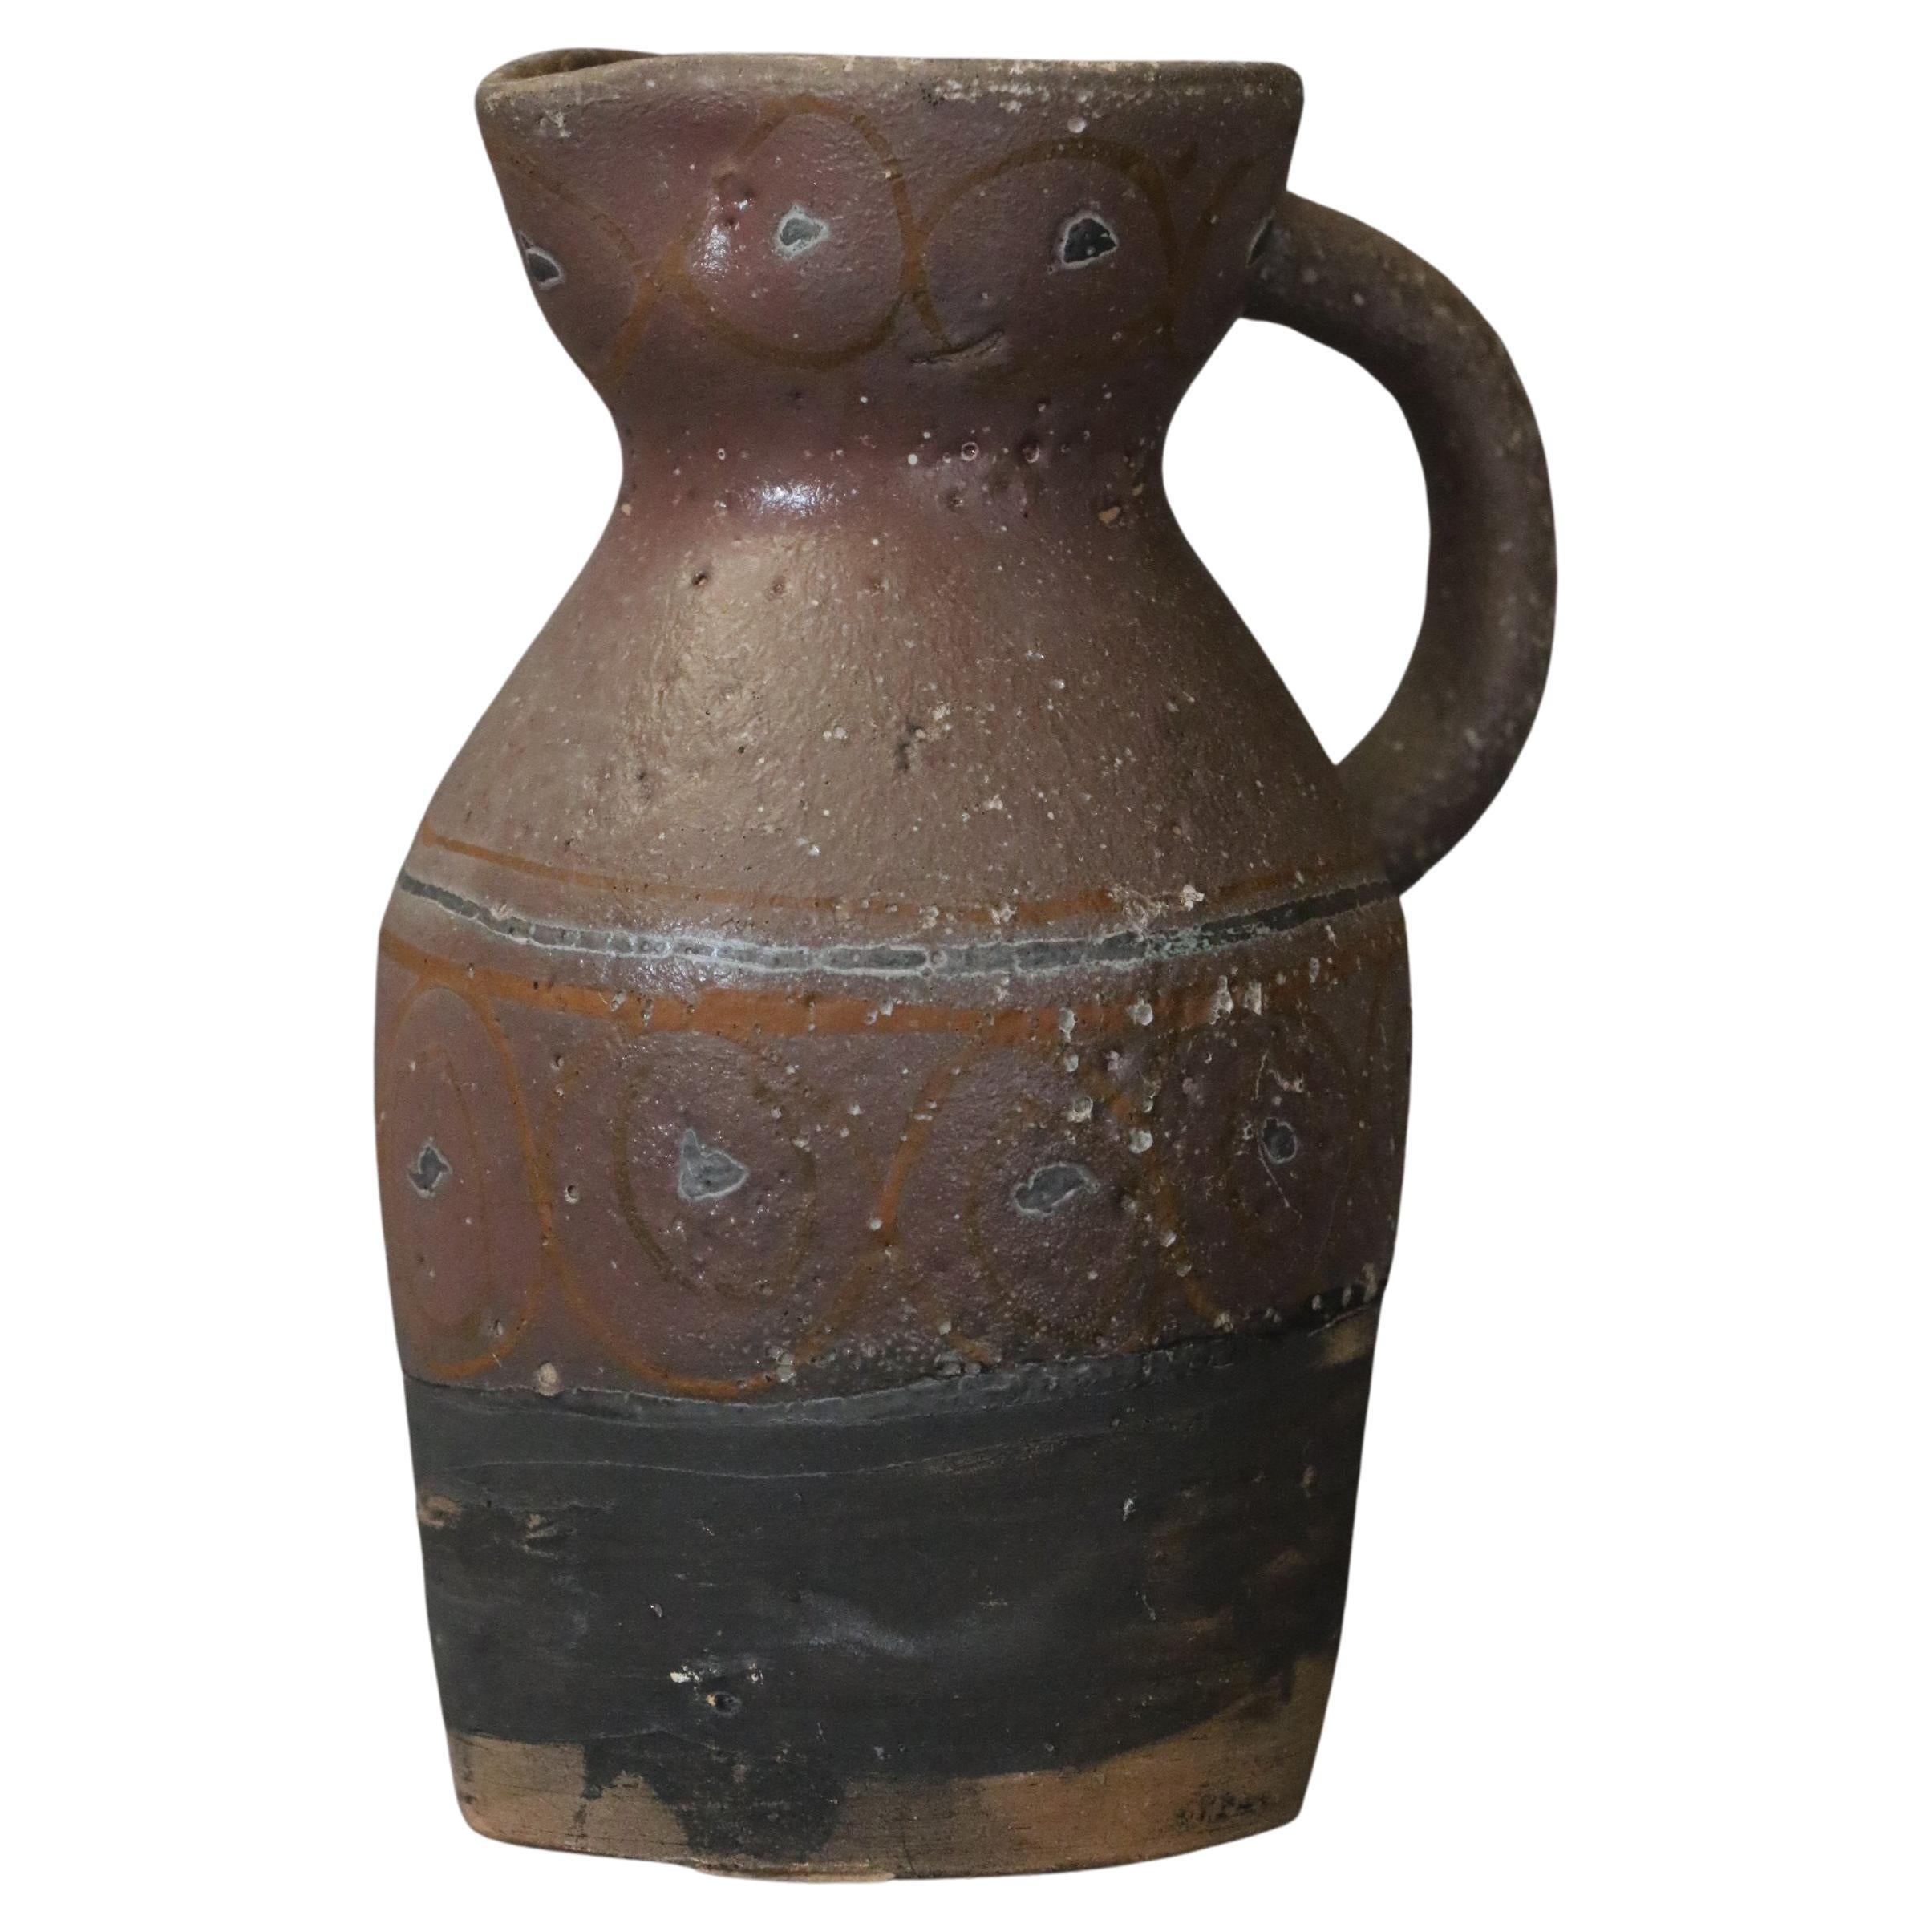 Mid-century French Ceramic Pitcher by Naumovitch - Grand Chêne Studio, Vallauris
Original piece, the pitcher is enamelled on the upper part and left rough on the lower part. The enamel is brown, slightly mauve, decorated with bluish dots and brick